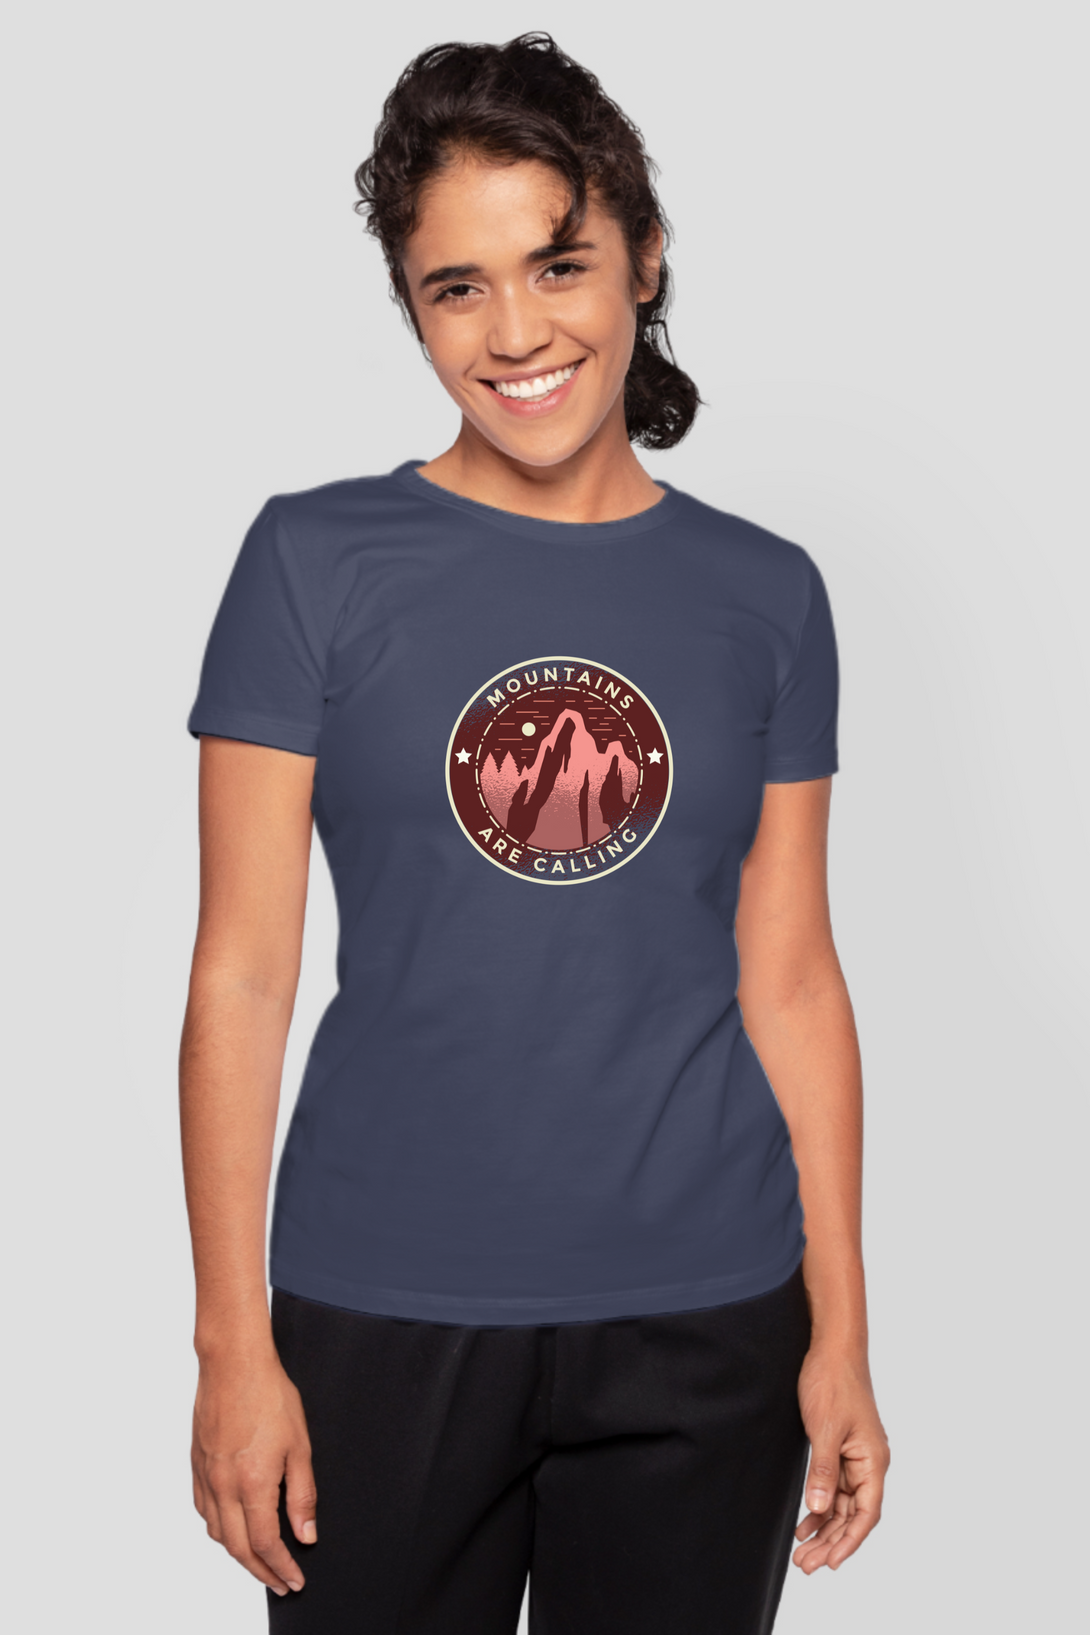 Mountains Are Calling Printed T-Shirt For Women - WowWaves - 5